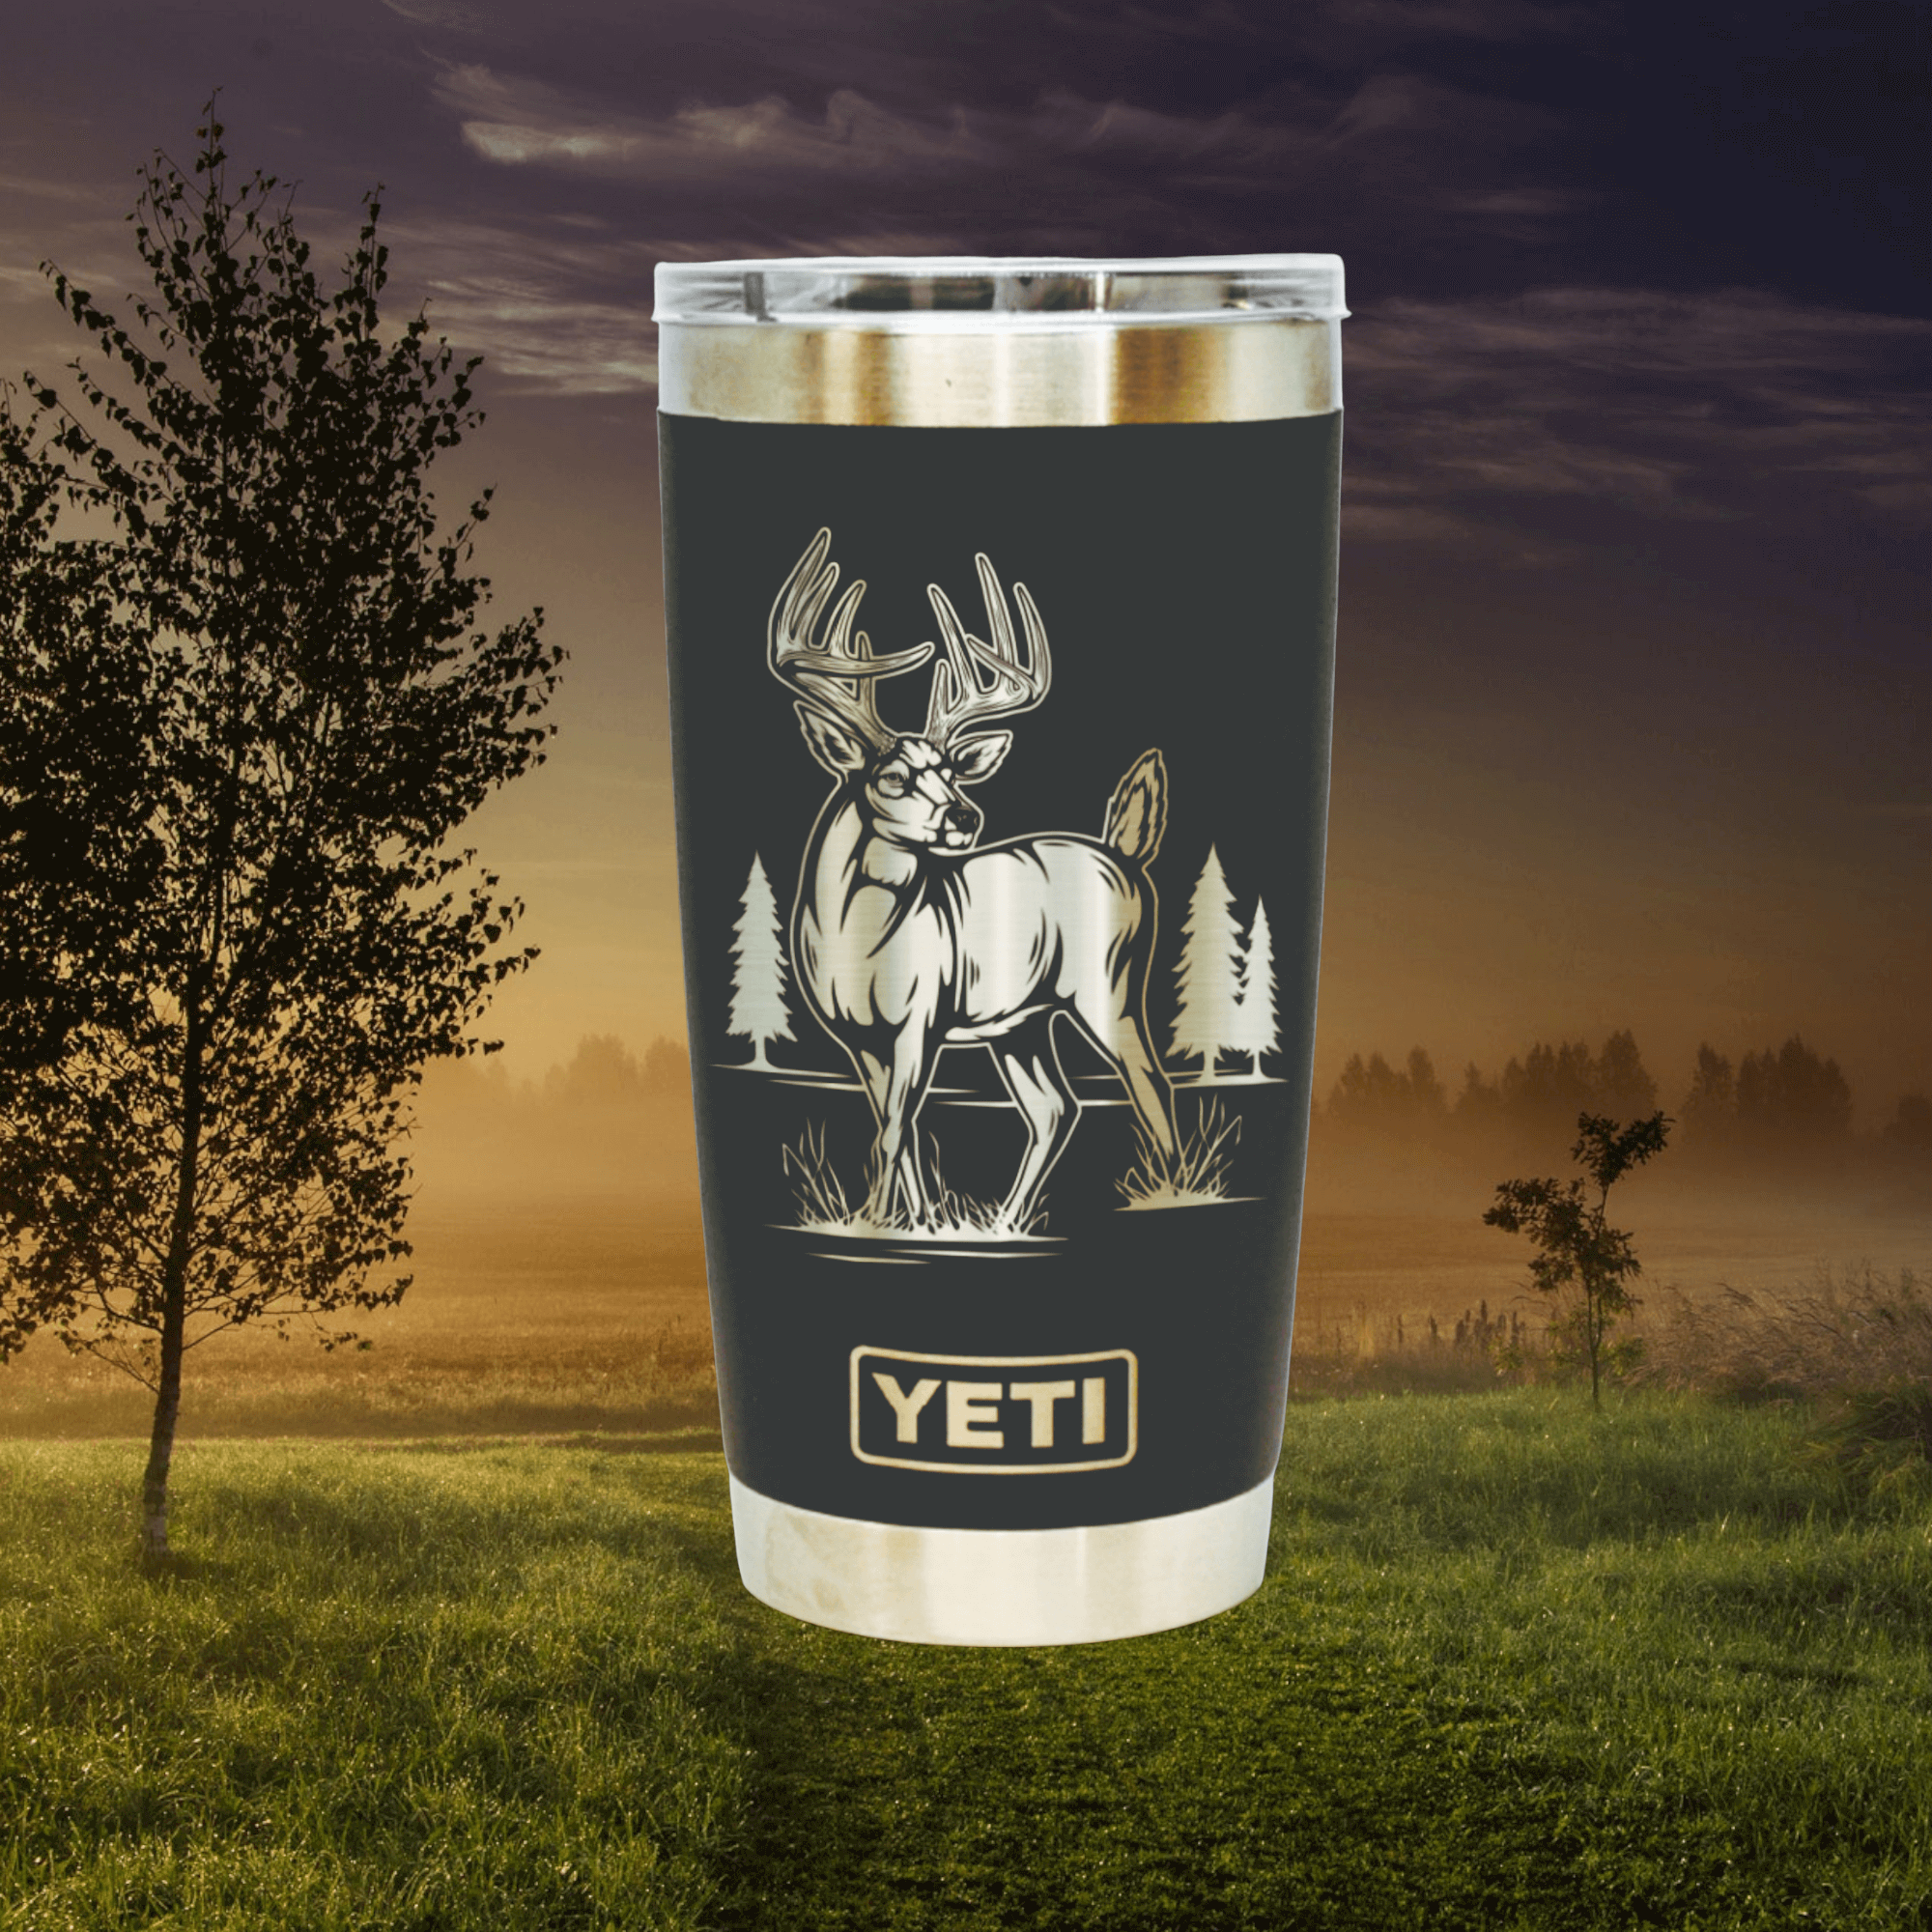 Black Yeti rambler with whitetail deer. Outdoor scene in background of photo.